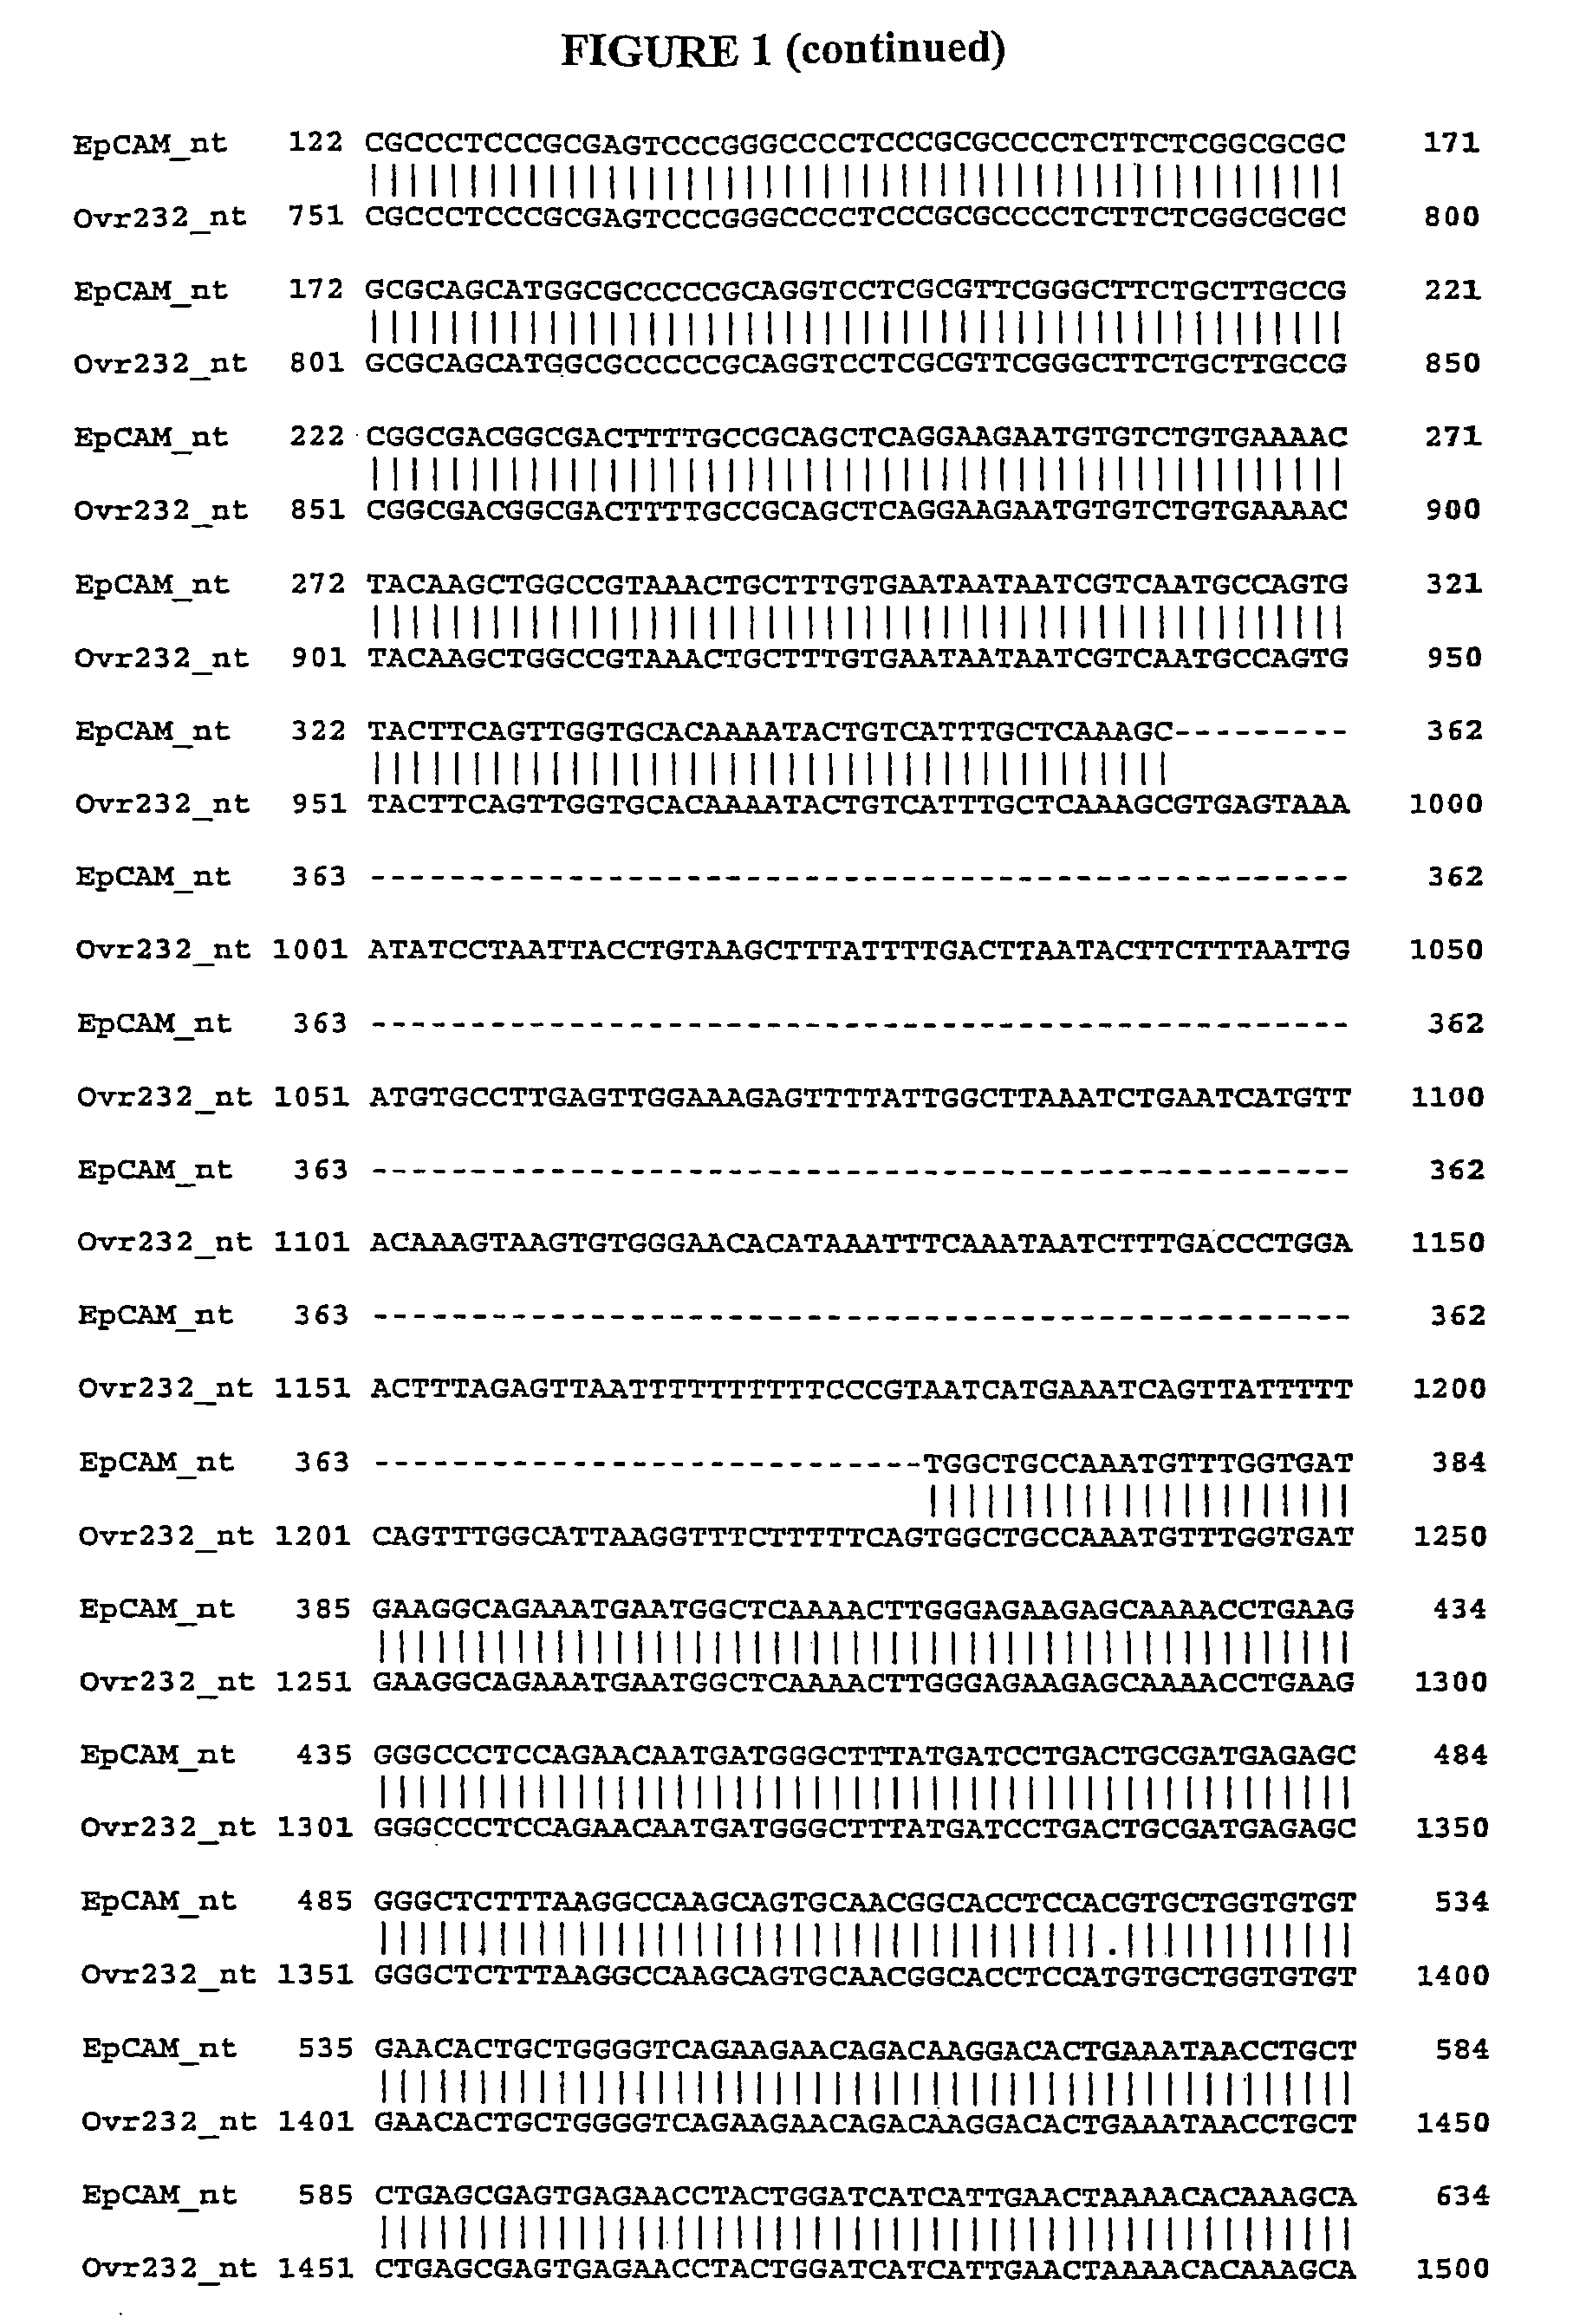 Compositions, splice variants and methods relating to ovarian specific genes and proteins